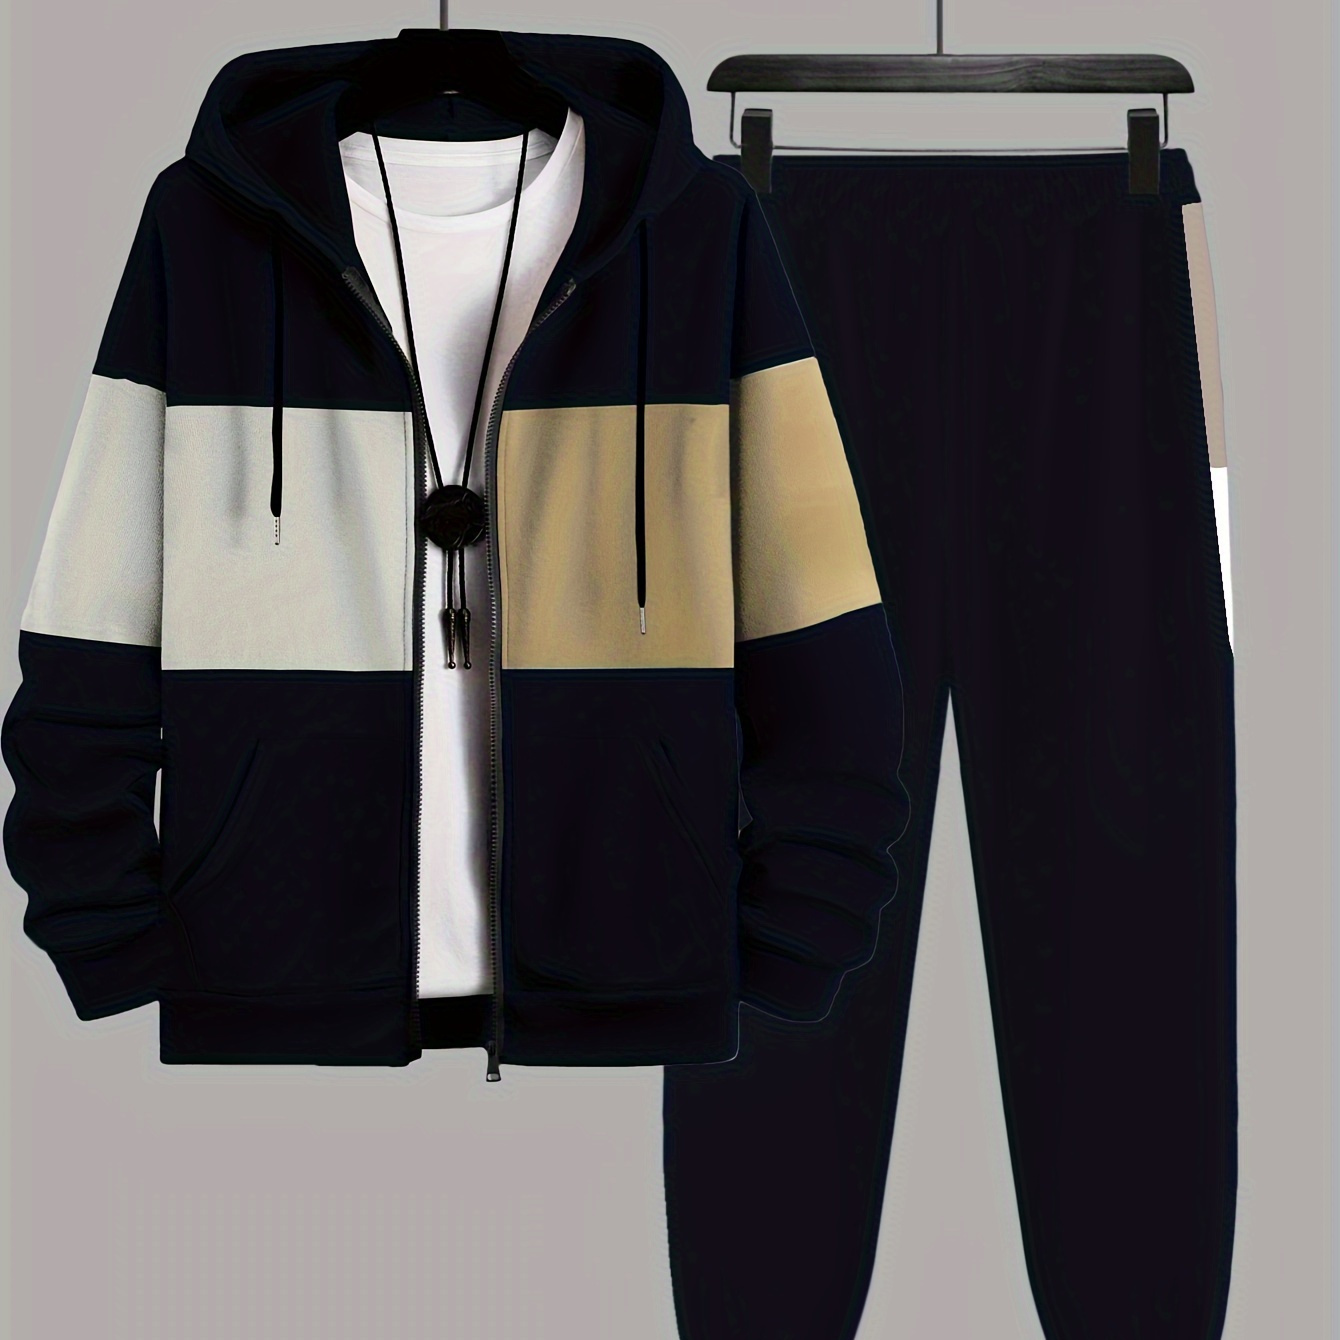 

Plus Size Men's 2pcs Outfits, Contrast Hooded Jacket & Joggers Set For Spring Fall Winter, Men's Clothing